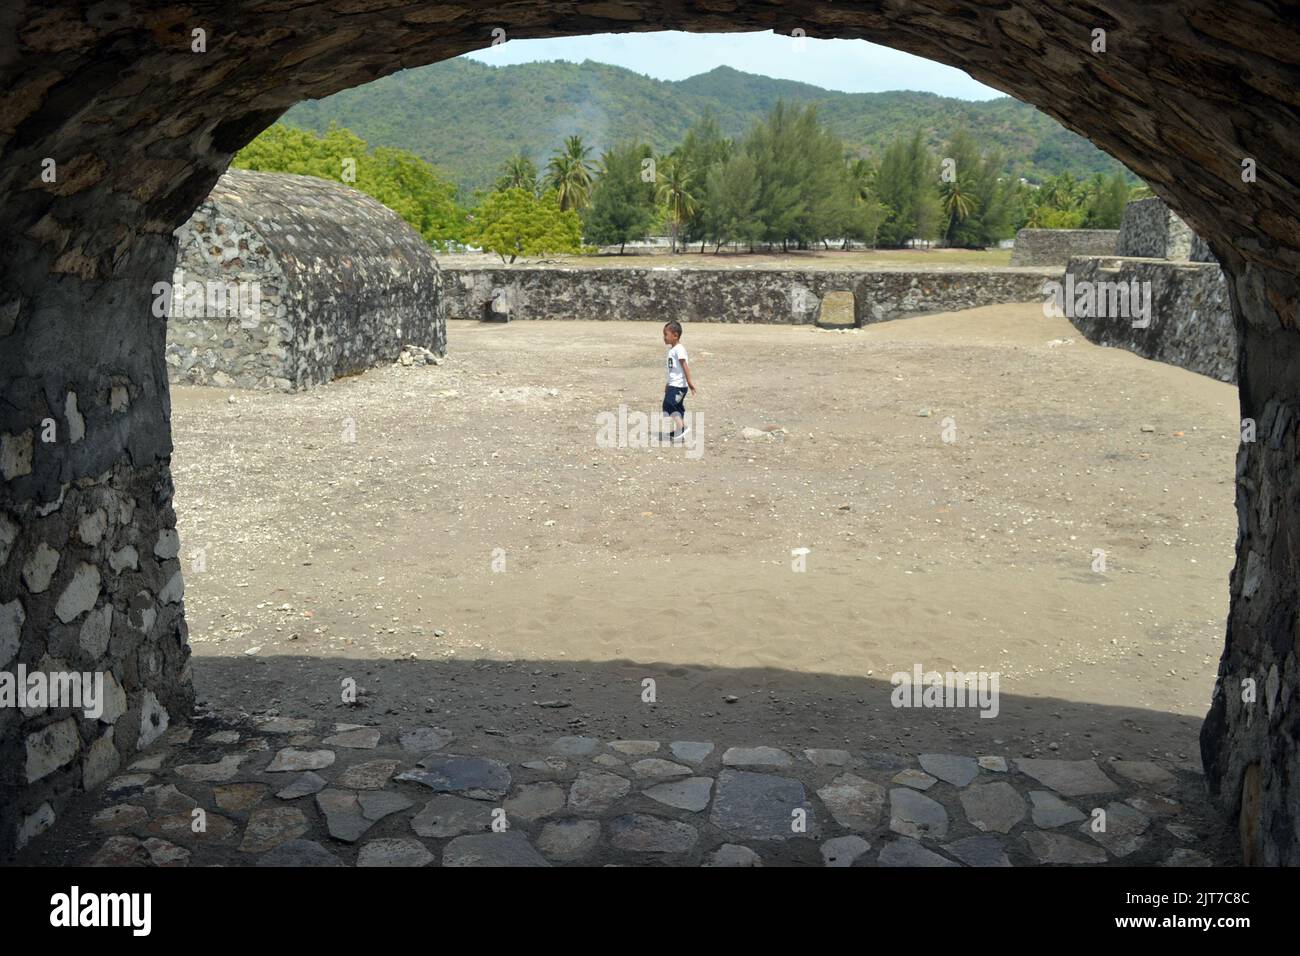 The kid on walking around Indra Patra fortress in Aceh Indonesia Stock Photo